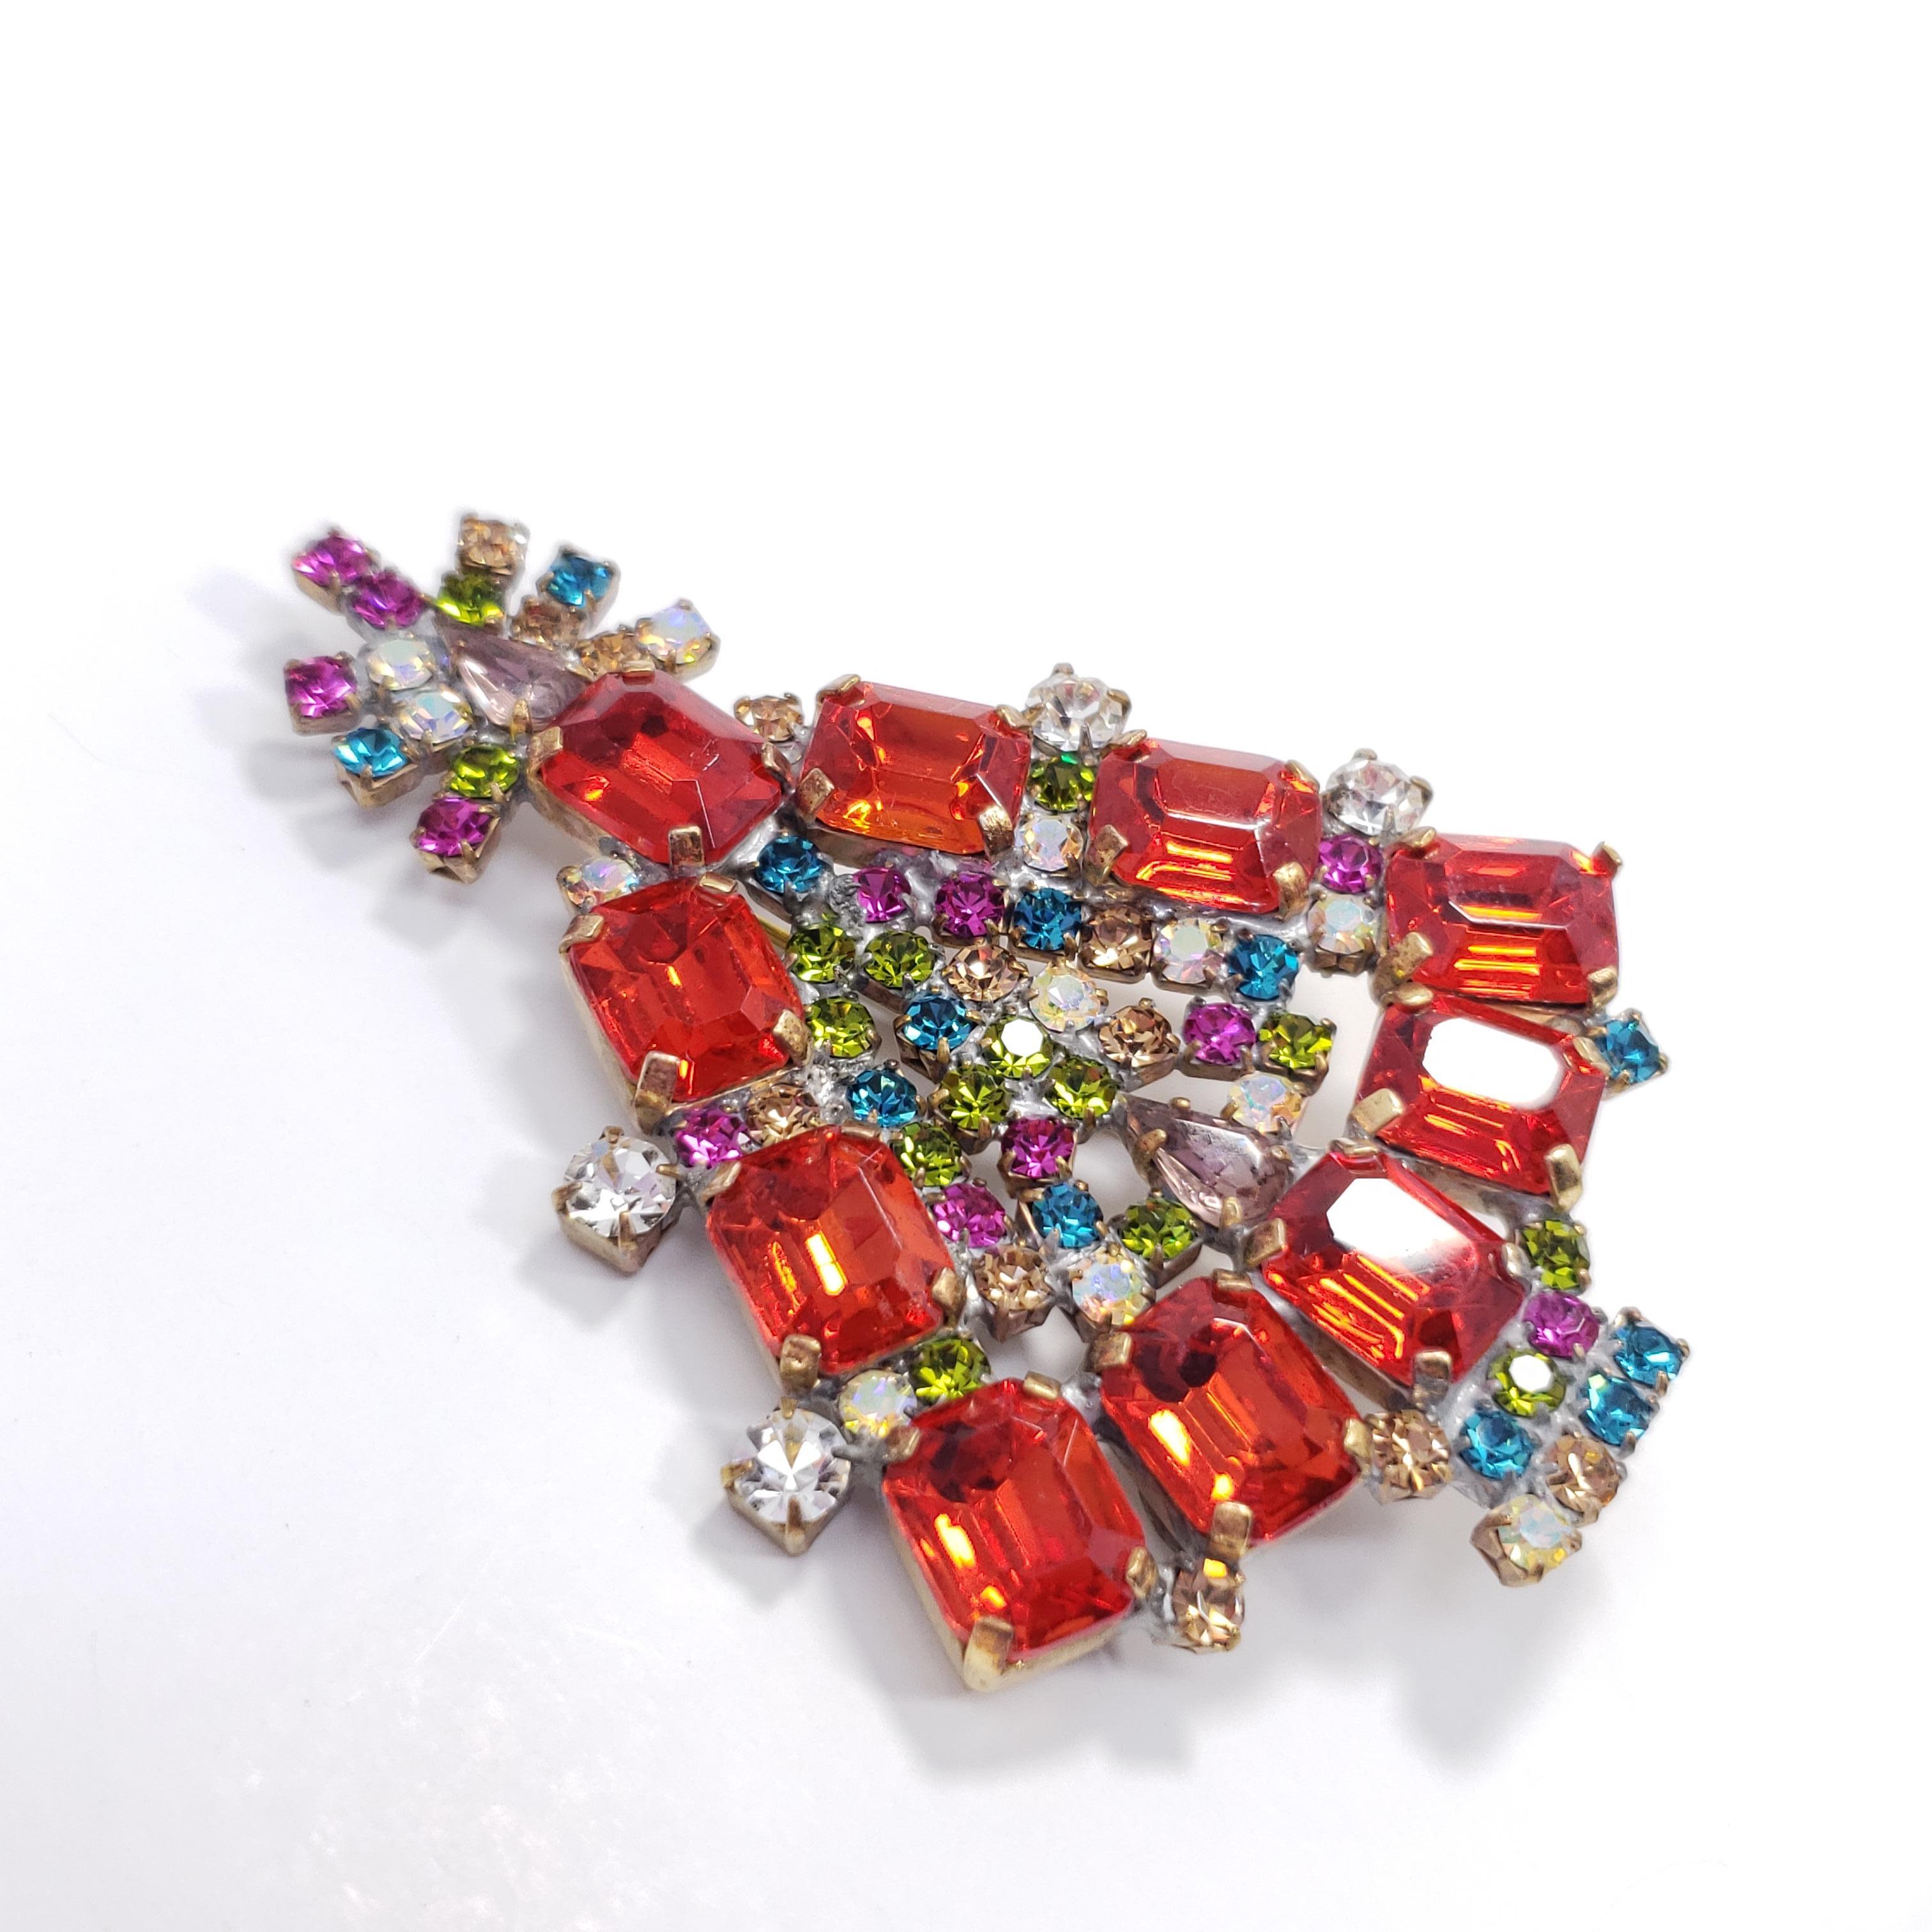 This delightfully festive pin features a Christmas tree decorated with dazzling crystals in ruby, sapphire, peridot, and topaz colors!

Marks / hallmarks / etc: Husar D